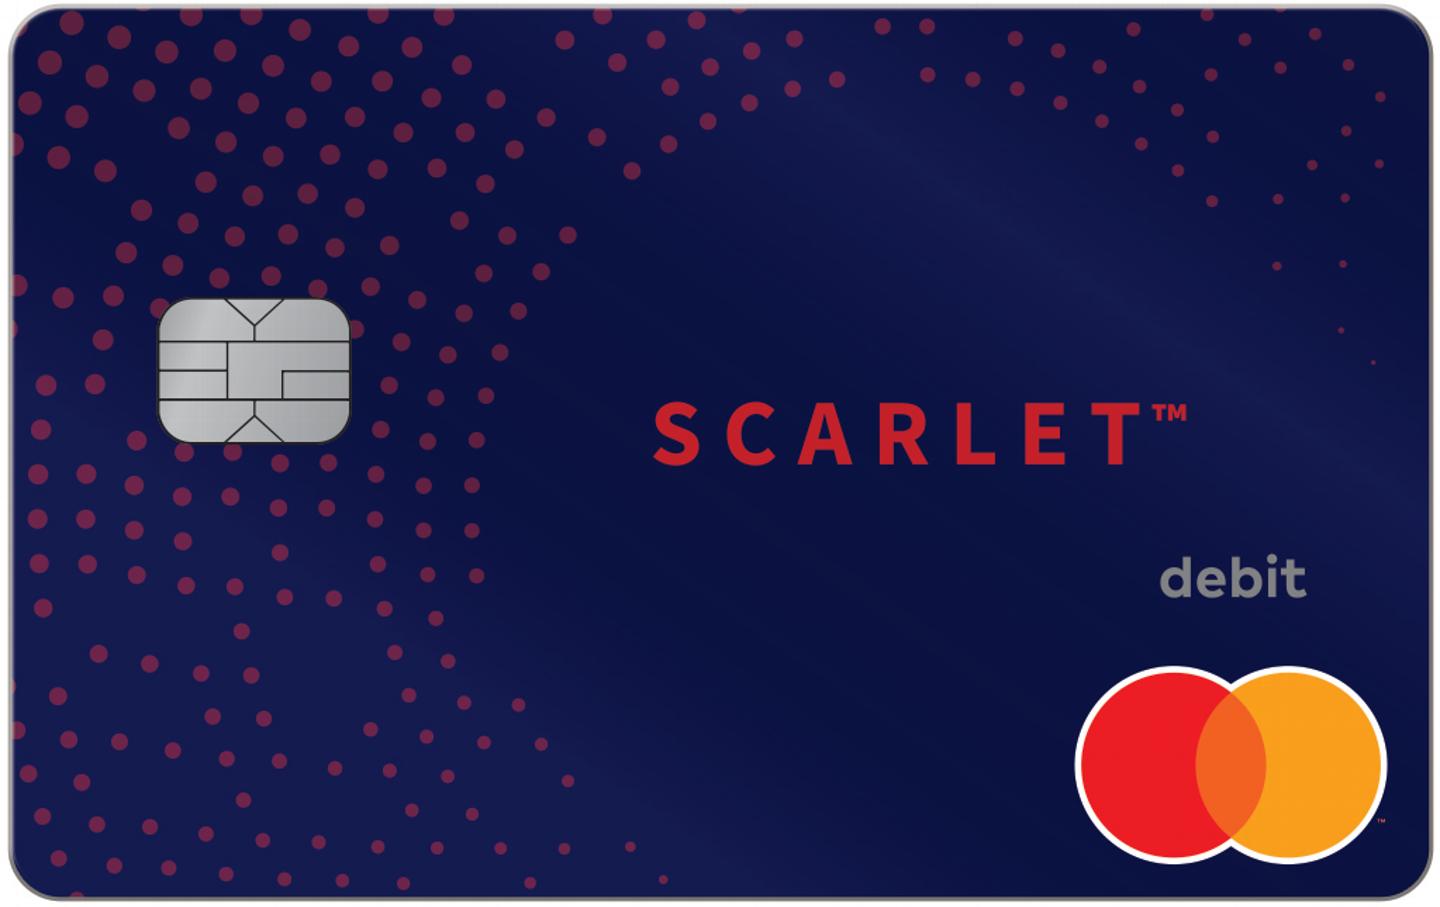 Scarlet™, a New Bank Account and Debit Mastercard®, Launches ...